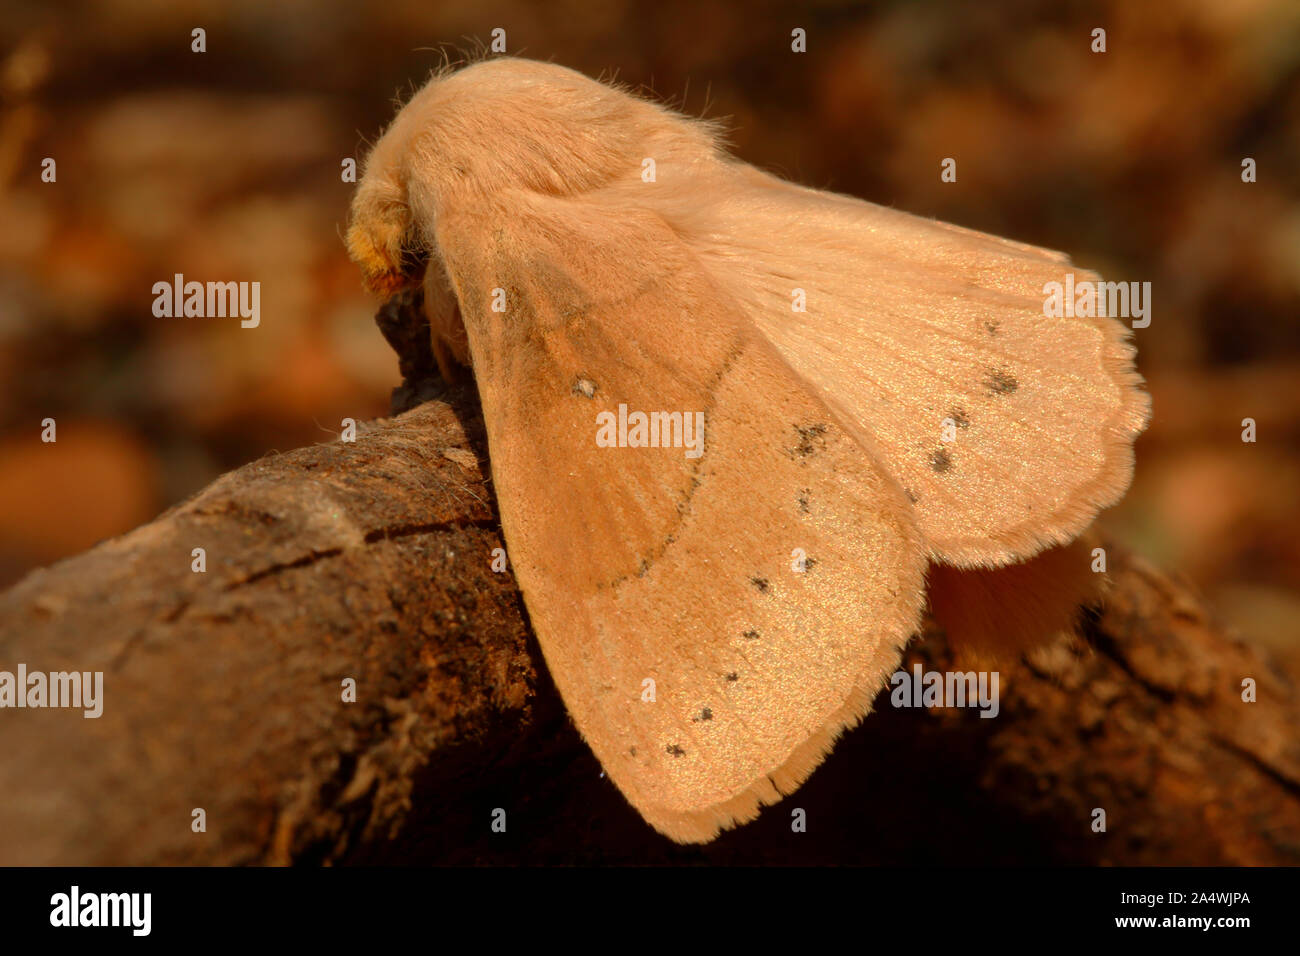 https://c8.alamy.com/comp/2A4WJPA/a-furry-brown-moth-with-pearly-iridescent-wings-rests-in-the-golden-light-of-an-autumn-dawn-at-mountain-sanctuary-nature-reserve-2A4WJPA.jpg